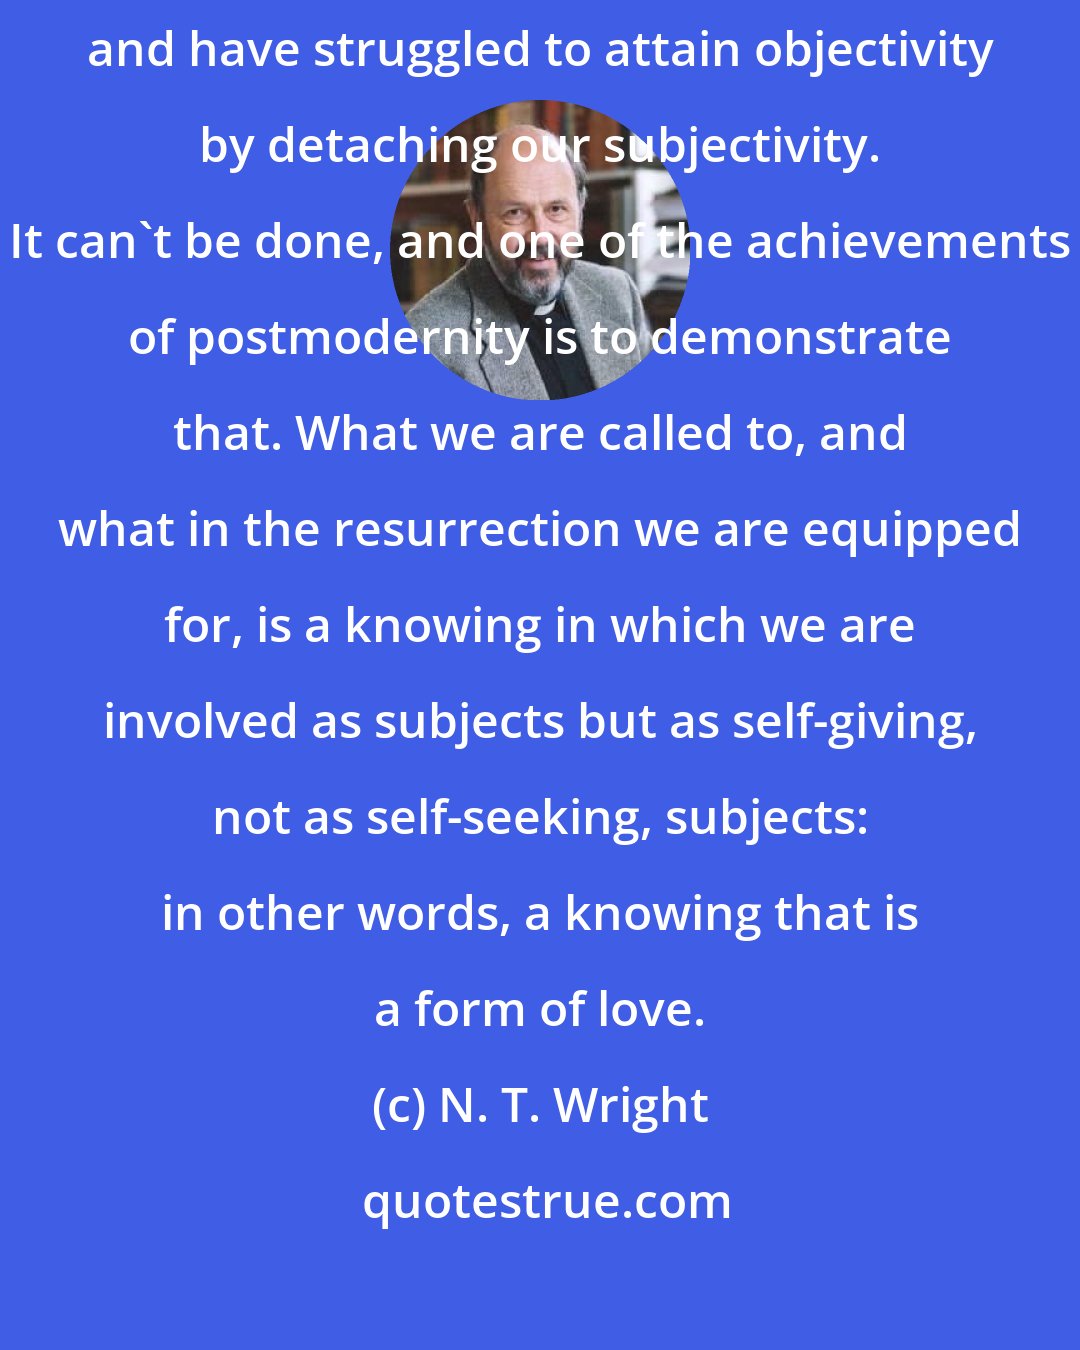 N. T. Wright: We have traditionally thought of knowing in terms of subject and object and have struggled to attain objectivity by detaching our subjectivity. It can't be done, and one of the achievements of postmodernity is to demonstrate that. What we are called to, and what in the resurrection we are equipped for, is a knowing in which we are involved as subjects but as self-giving, not as self-seeking, subjects: in other words, a knowing that is a form of love.